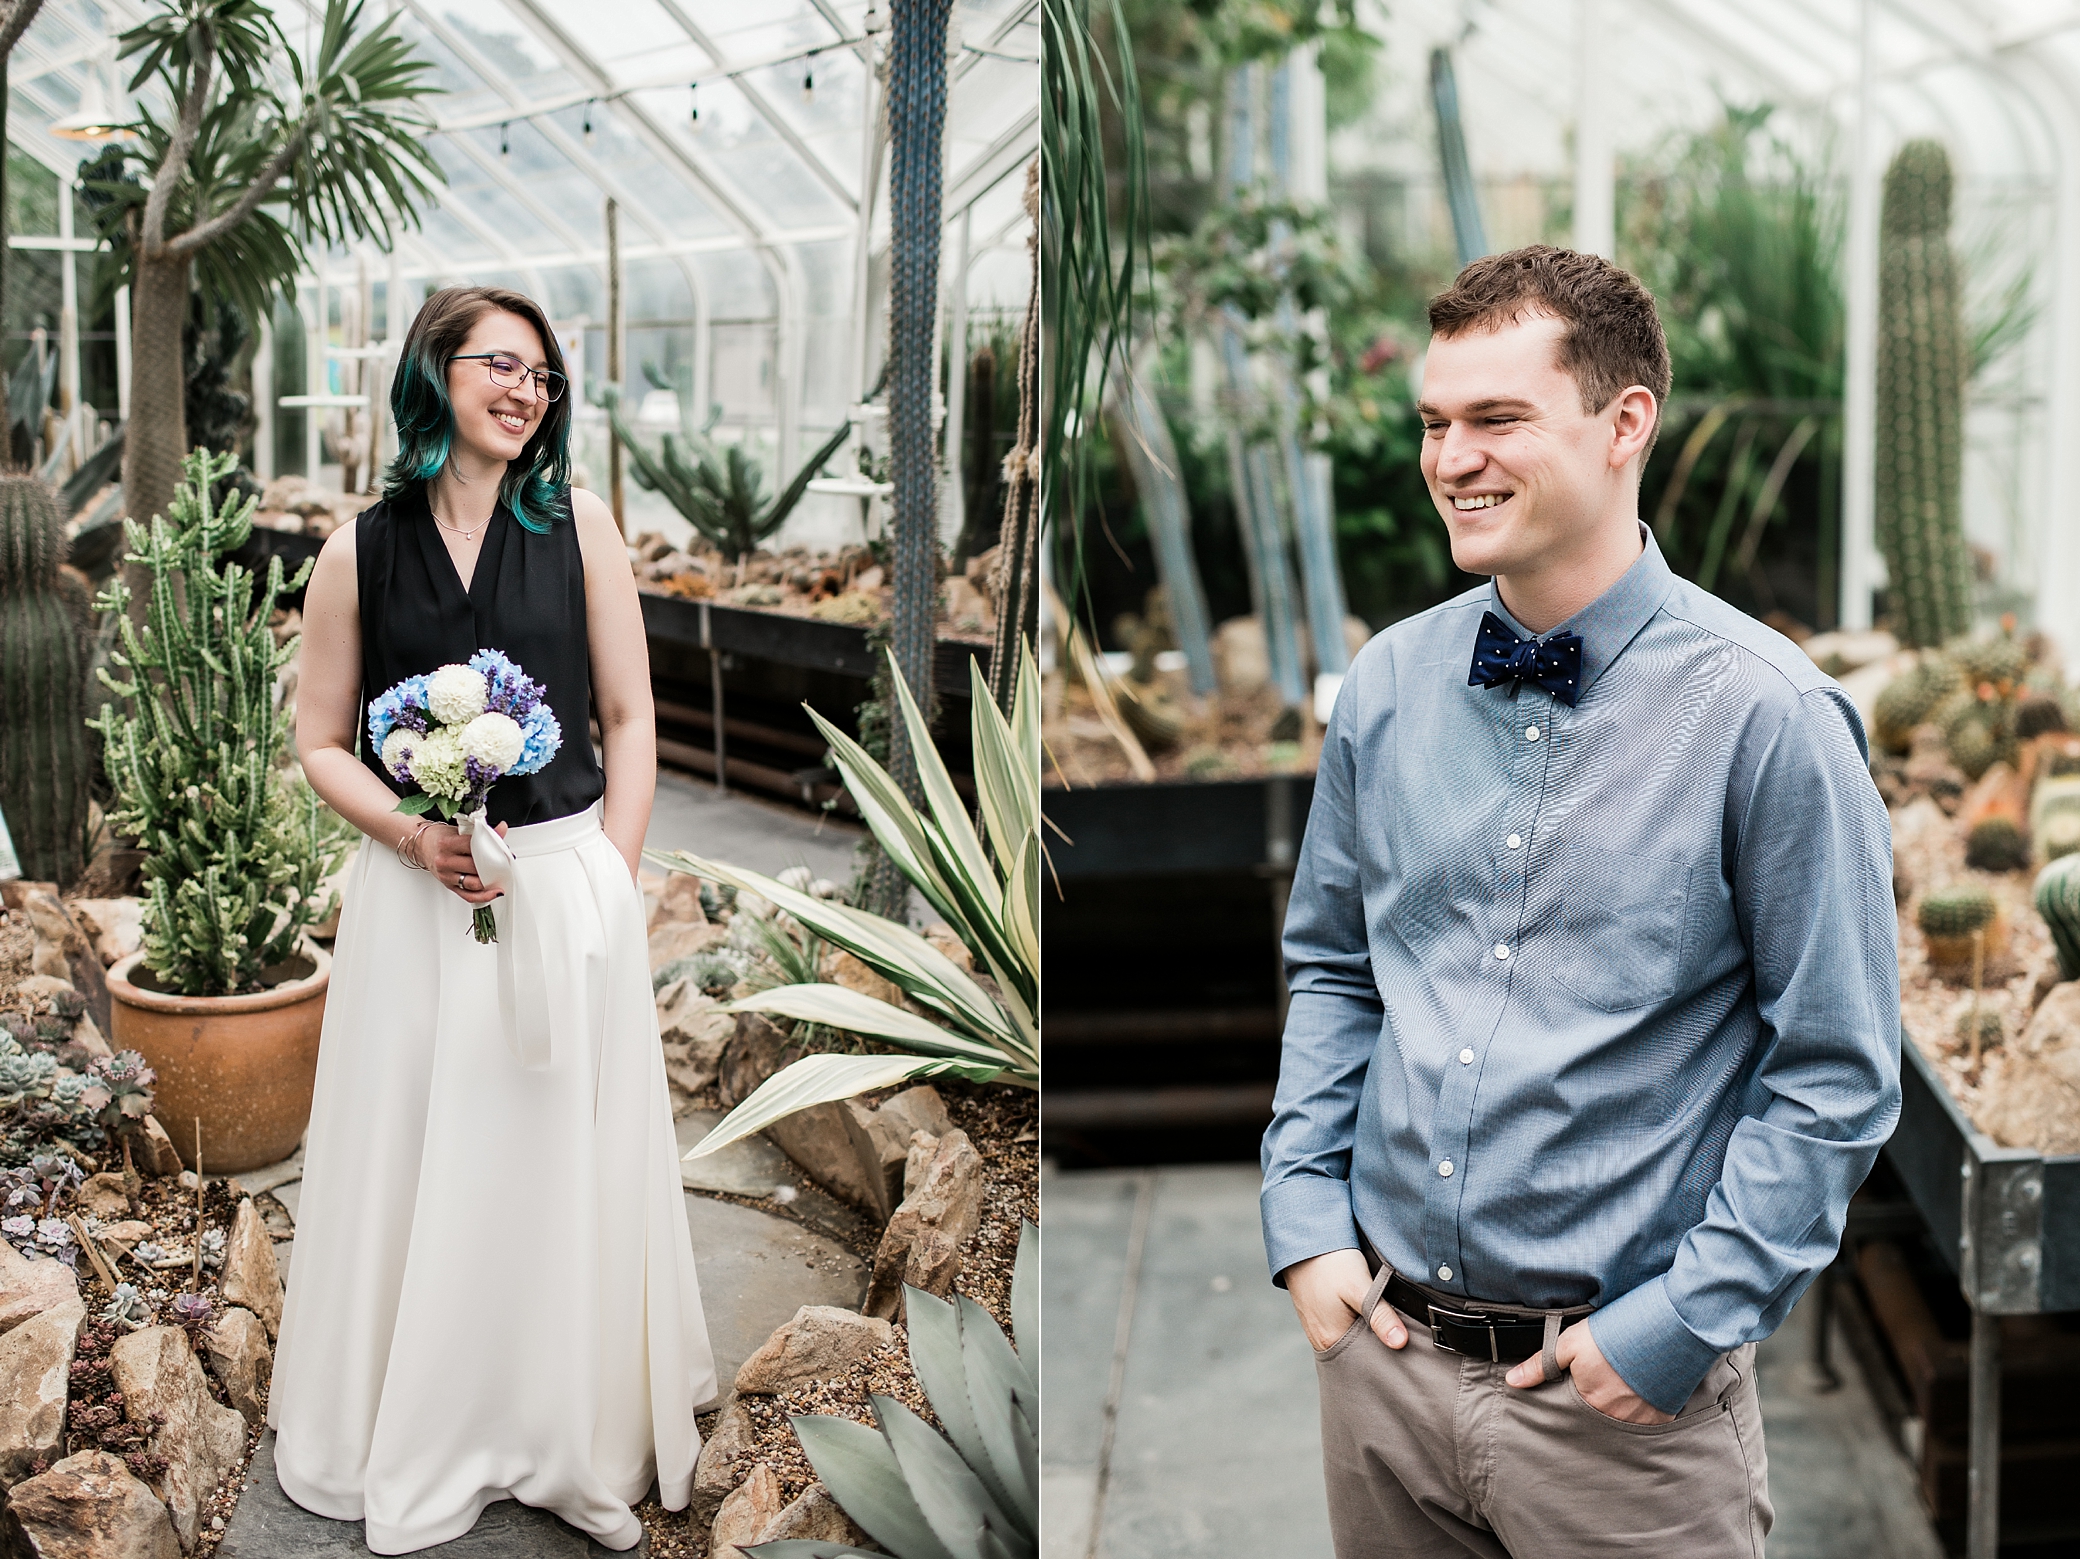 Small, intimate wedding ceremony at the Volunteer Park Conservatory in Seattle. Photographed by Seattle Wedding Photographer, Megan Montalvo Photography. 